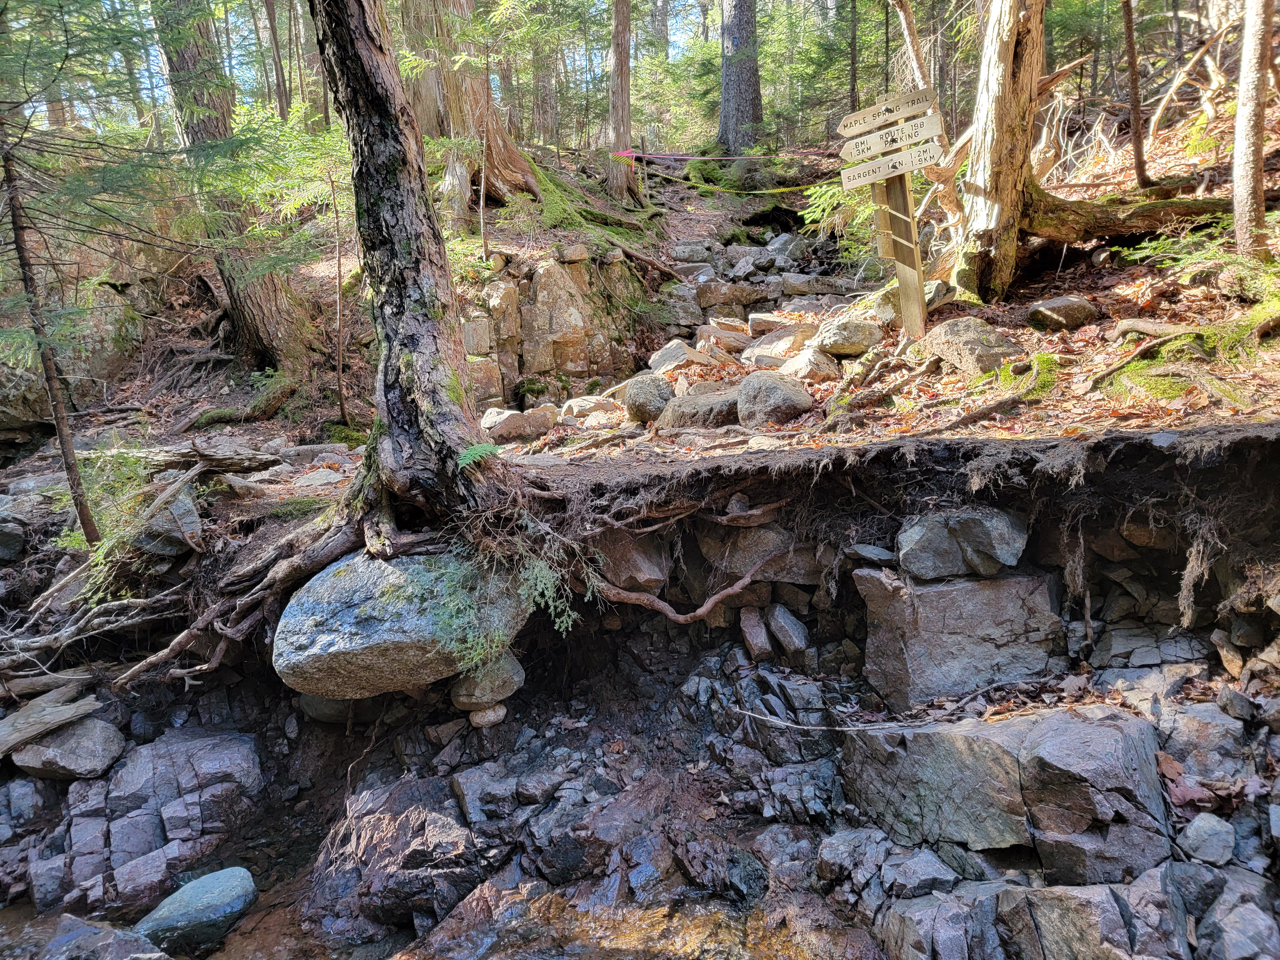 A view of eroded streambank, with tree roots dangling. Above is the sign for the junction of Maple Spring Trail and Giant Slide Trail.